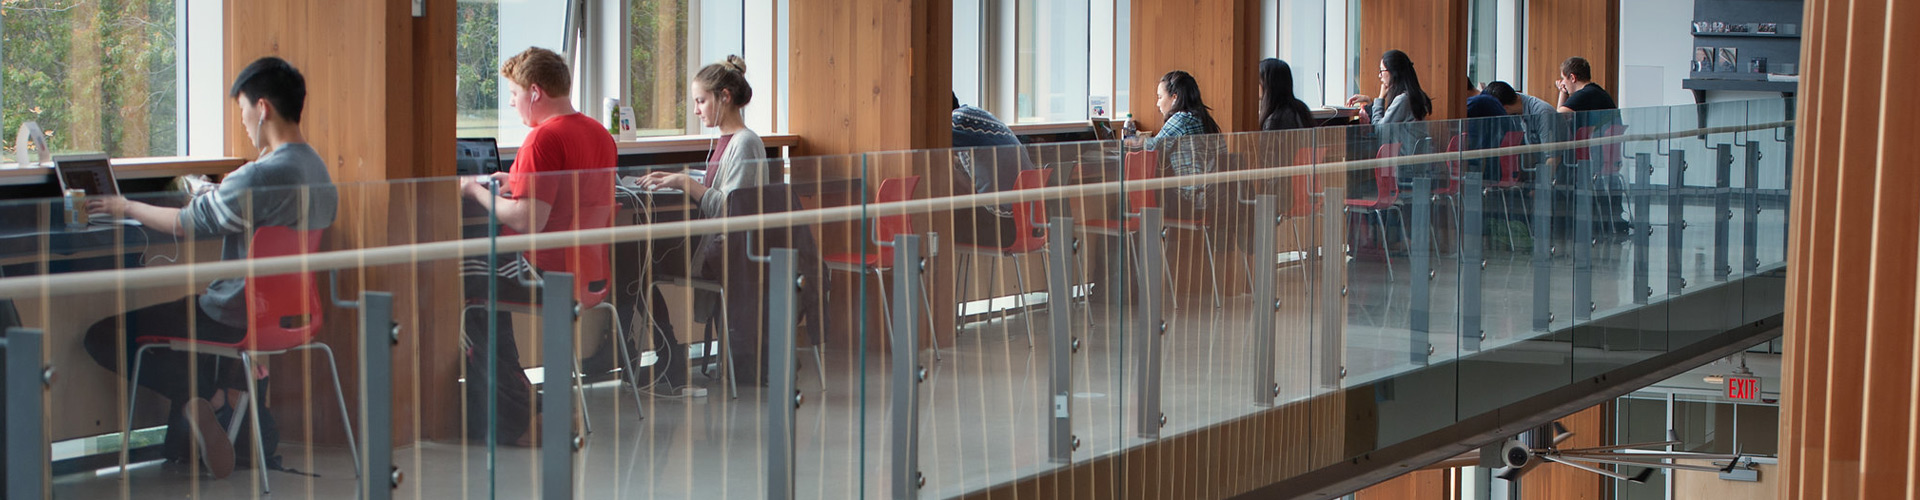 students in cubicle seating along building window on the upper floor